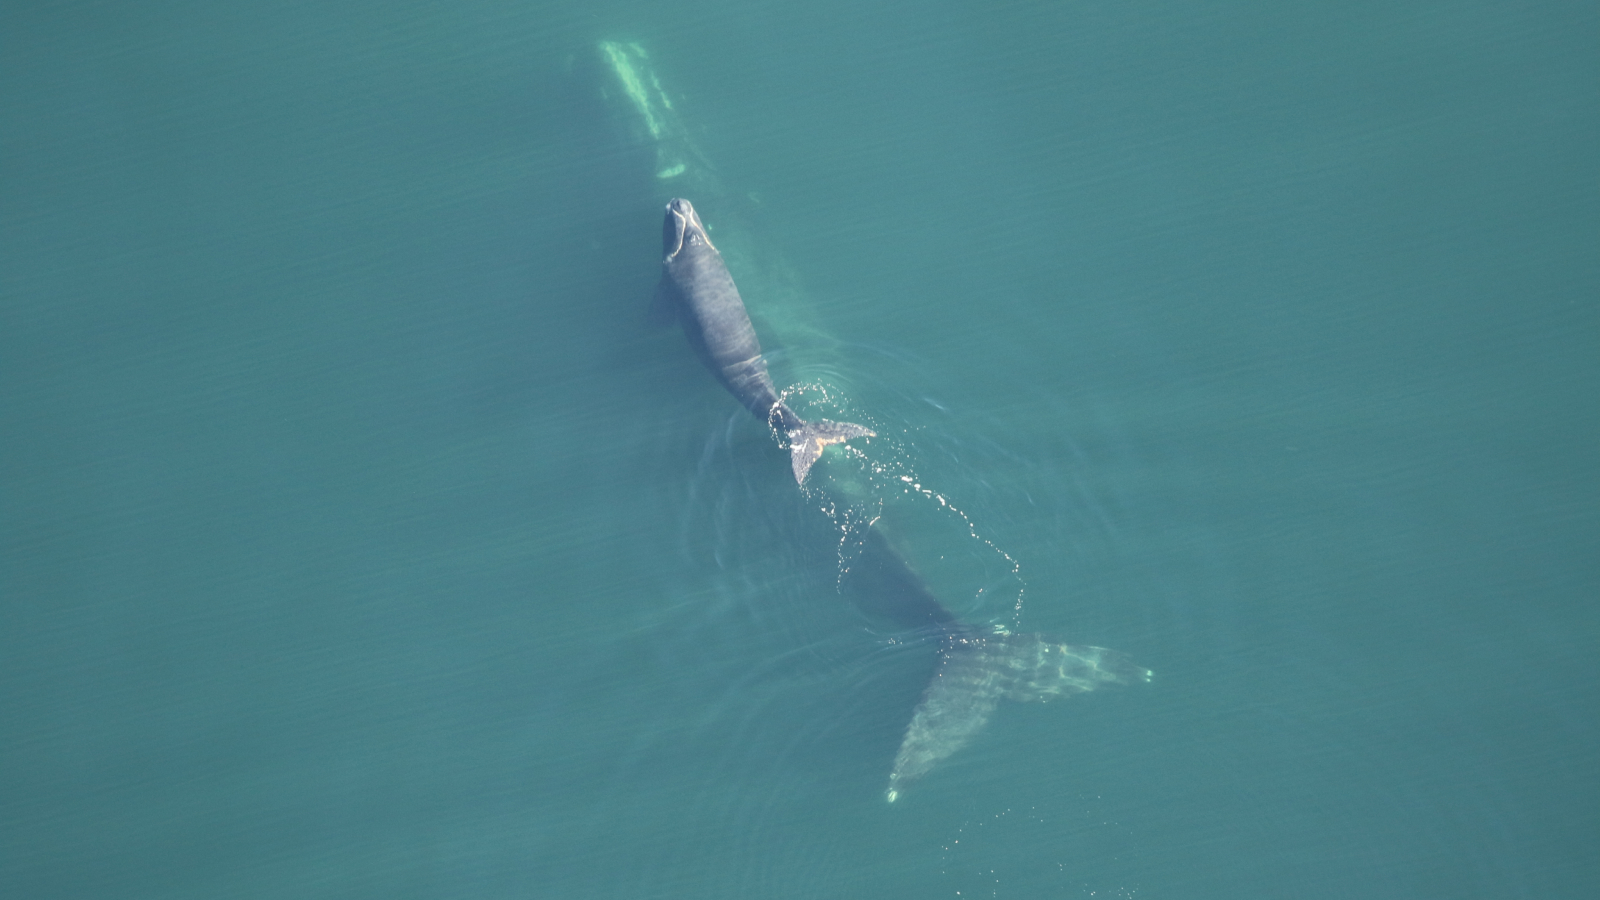 Critically endangered right whales are shrinking, with drastic consequences for their population